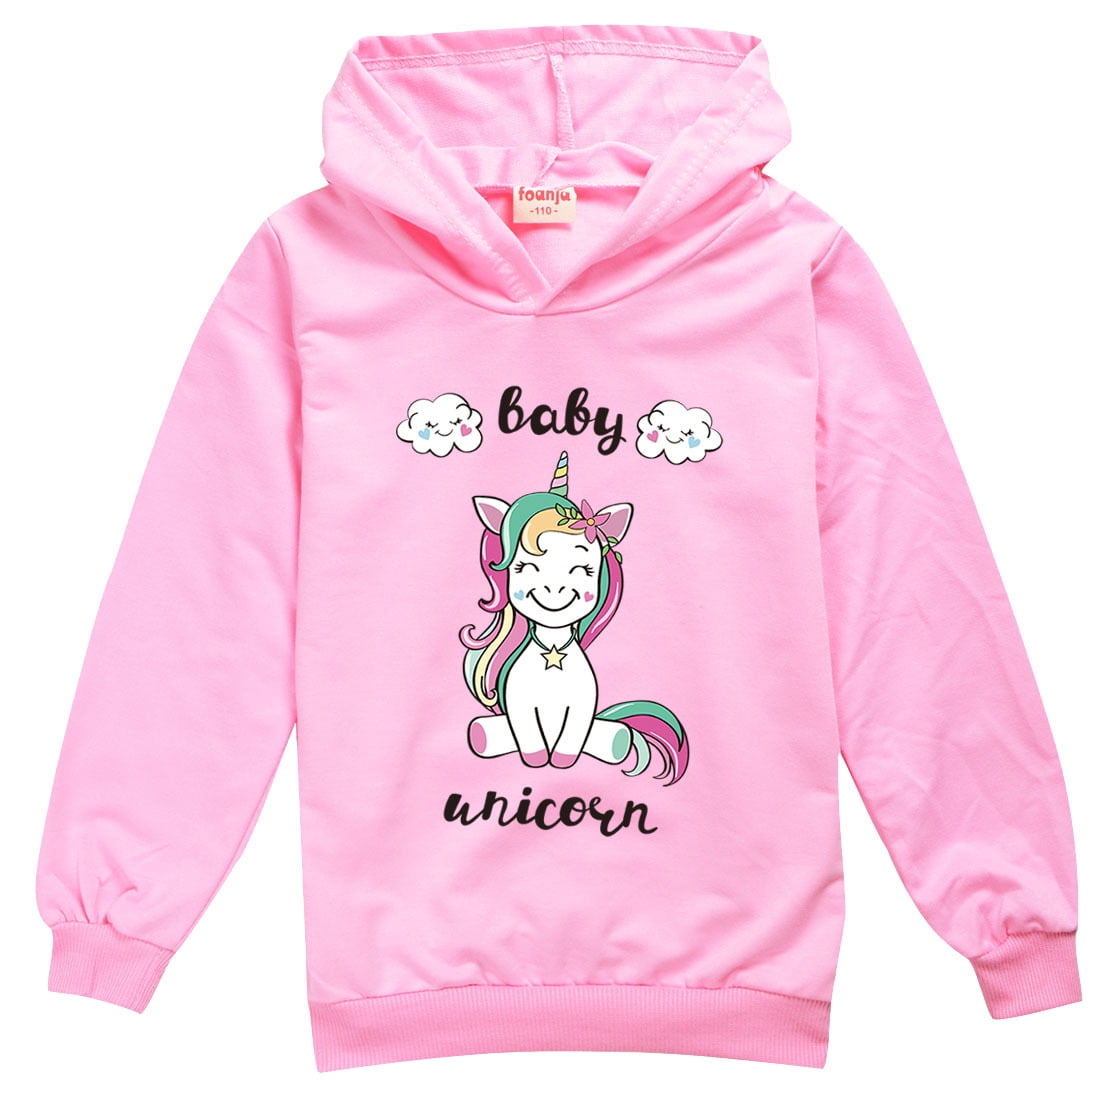 Baby Girl Hooded Sweatshirt Cotton Unicorn Fashion Hoodies Pullover Top for Toddler Little Kid 1-5t 